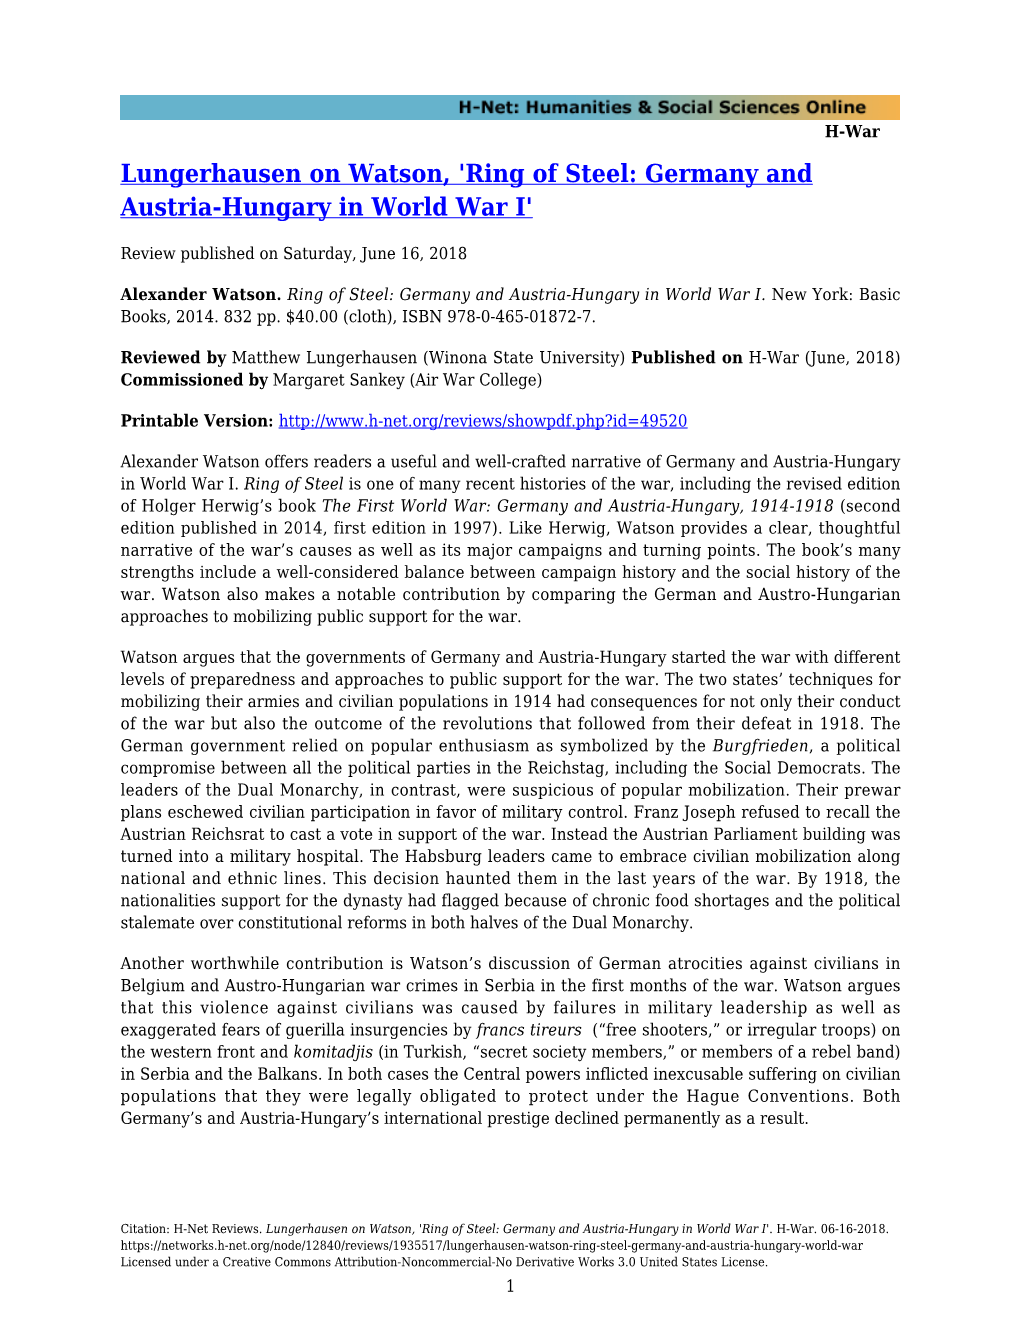 Lungerhausen on Watson, 'Ring of Steel: Germany and Austria-Hungary in World War I'